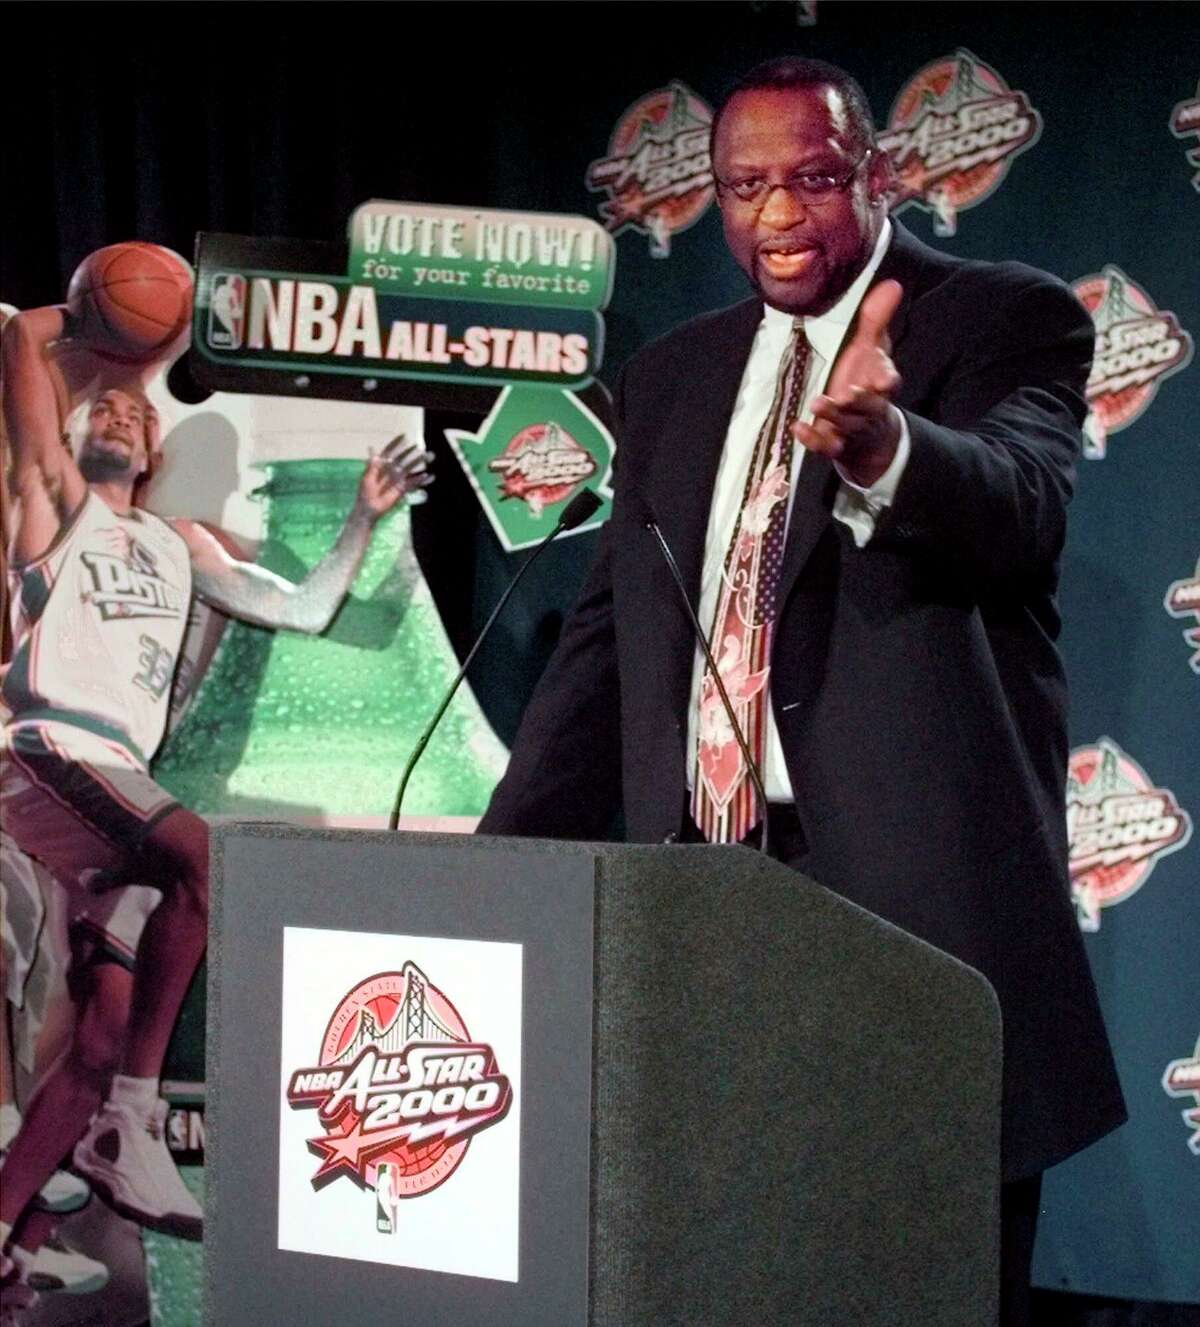 FILE -Former Hall of Fame player and coach Bob Lanier, spokesman for NBA's TeamUp, announces that balloting has begun for the NBA All-Star Game to be played in Oakland in February 2000 Monday, Nov. 15, 1999, in Oakland, Calif. Bob Lanier, the left-handed big man who muscled up beside the likes of Kareem Abdul-Jabbar as one of the NBA’s top players of the 1970s, died Tuesday, May 10, 2022. He was 73.(AP Photo/Paul Sakuma, File)